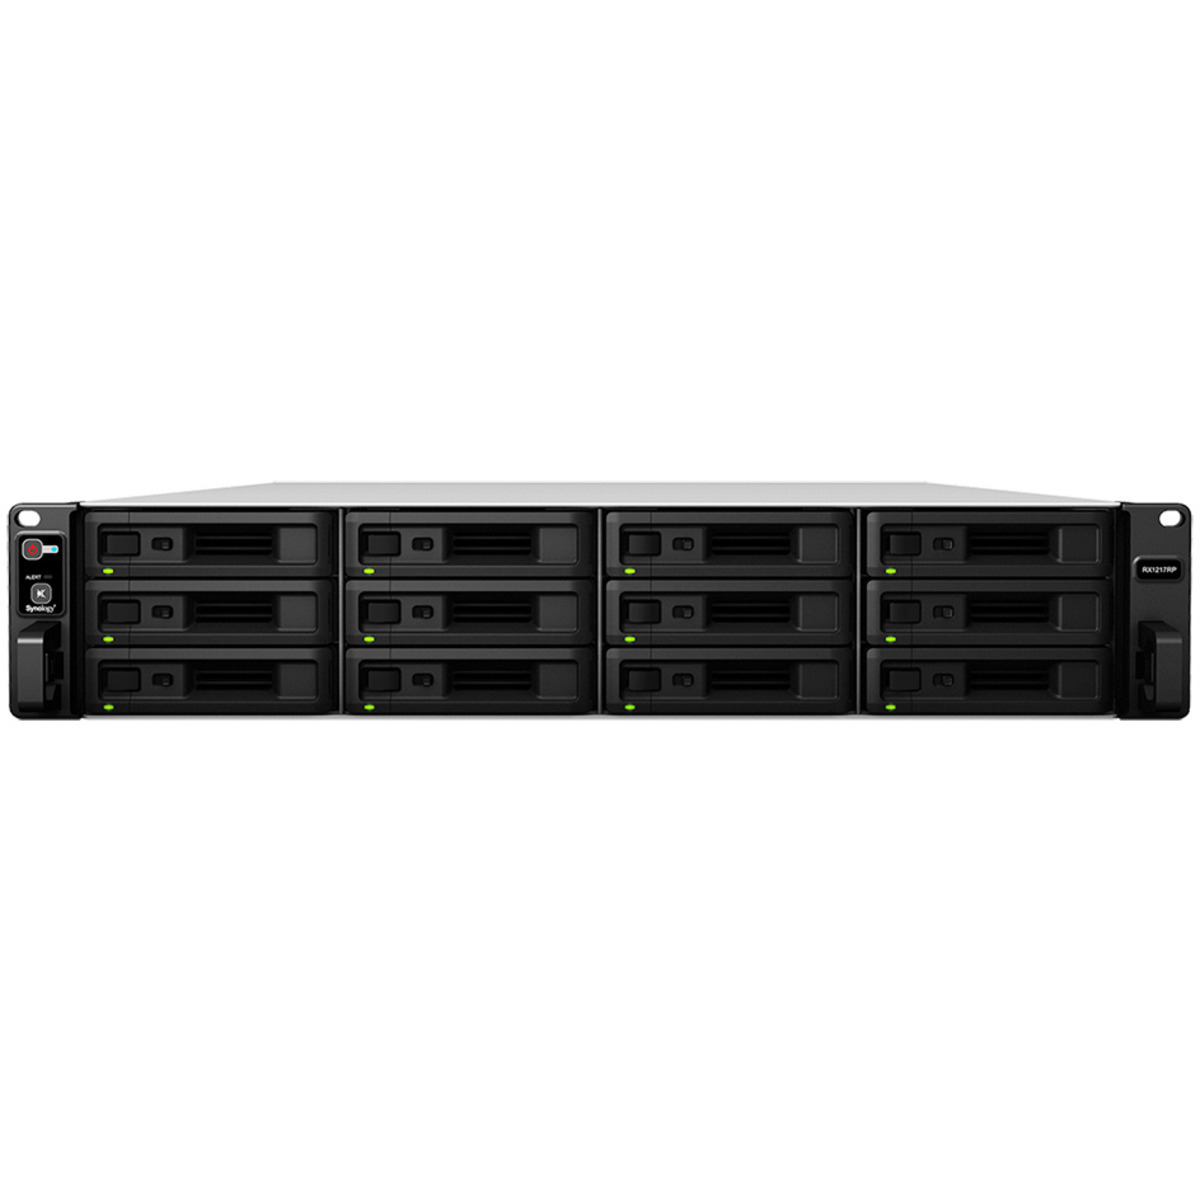 buy $2343 Synology RX1217 24tb RackMount Expansion Enclosure 12x2000gb Seagate BarraCuda ST2000DM008 3.5 7200rpm SATA 6Gb/s HDD CONSUMER Class Drives Installed - Burn-In Tested - ON SALE - nas headquarters buy network attached storage server device das new raid-5 free shipping usa christmas new year holiday sale RX1217